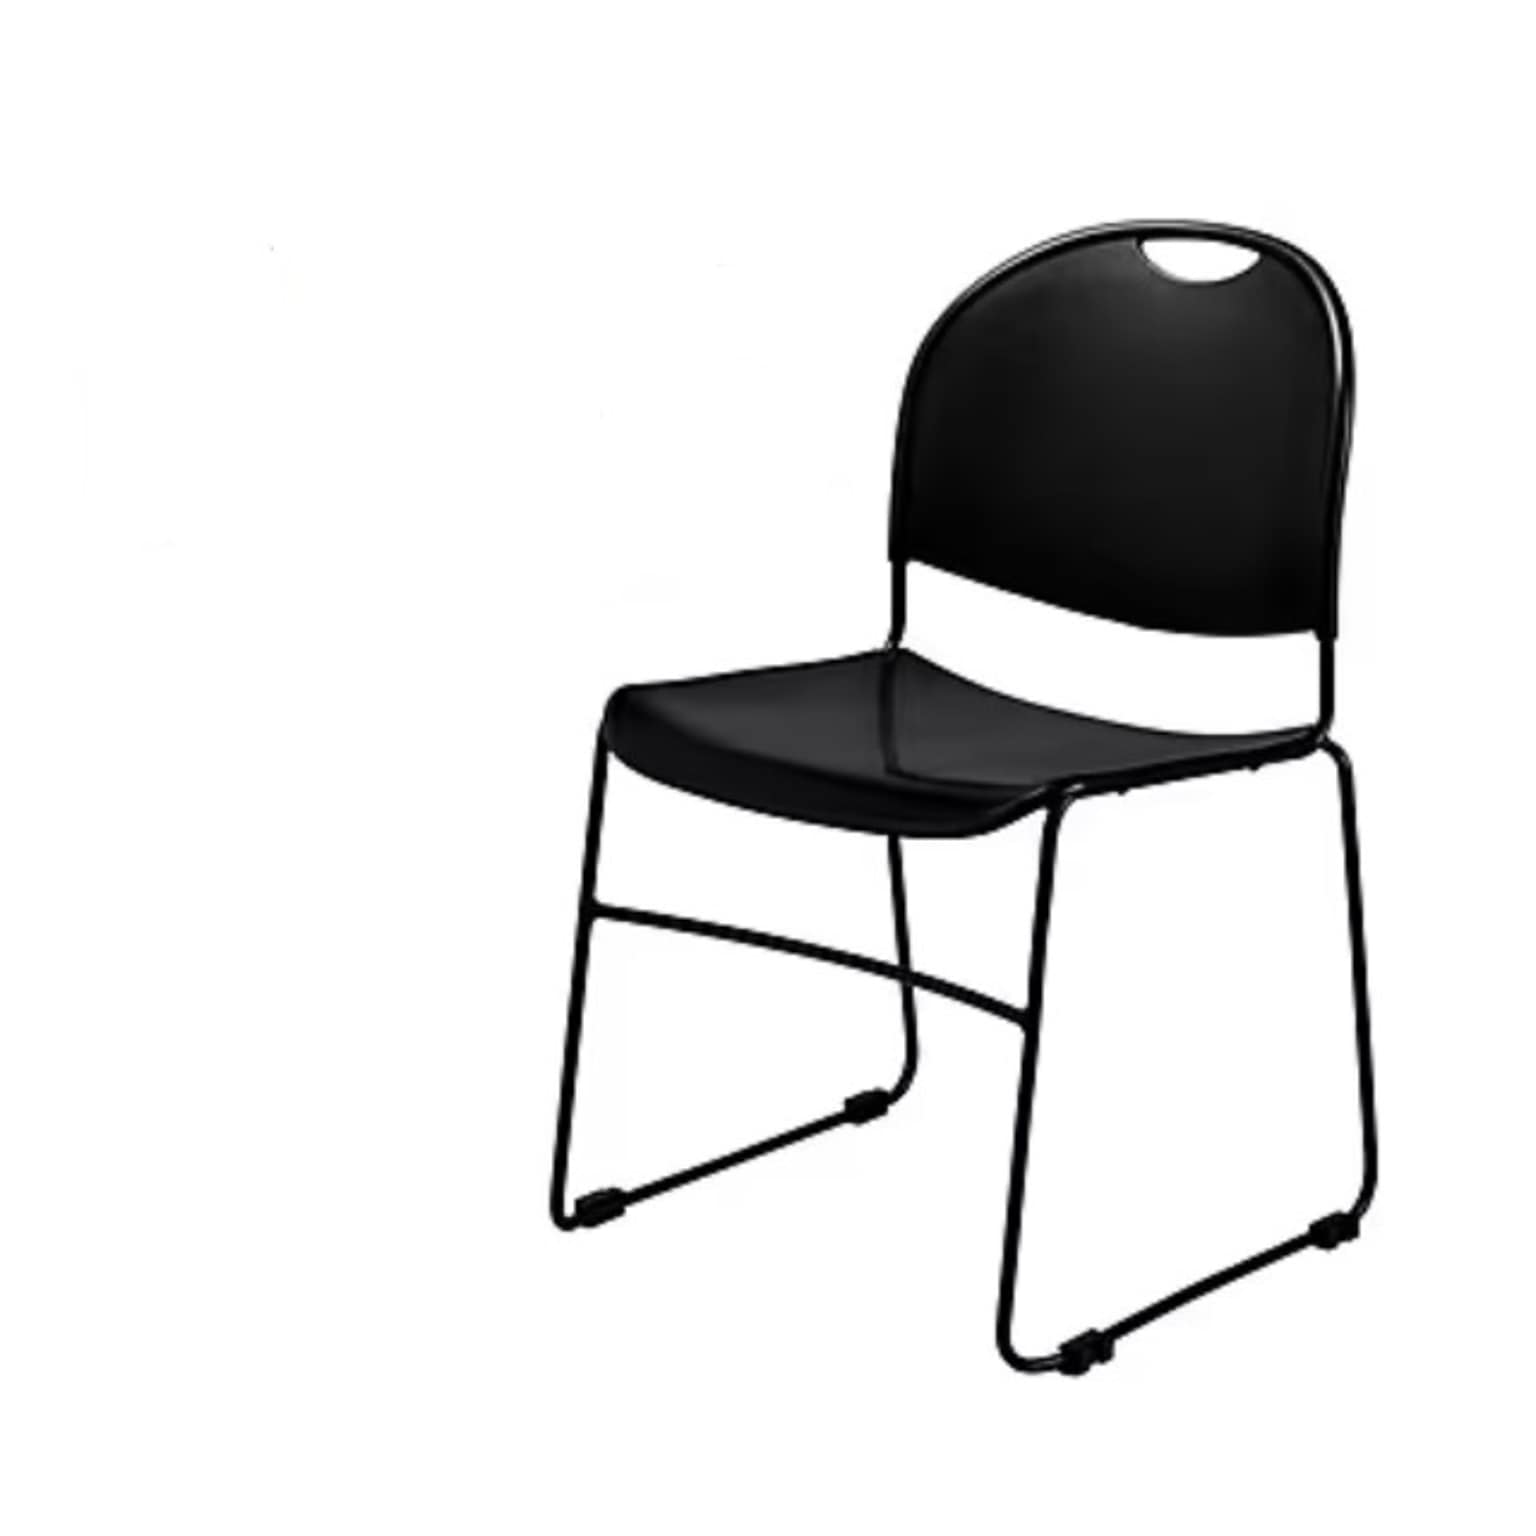 NPS Commercialine 850 Series Ultra Compact Stack Chair, Black, 12 Pack (850-CL/12)